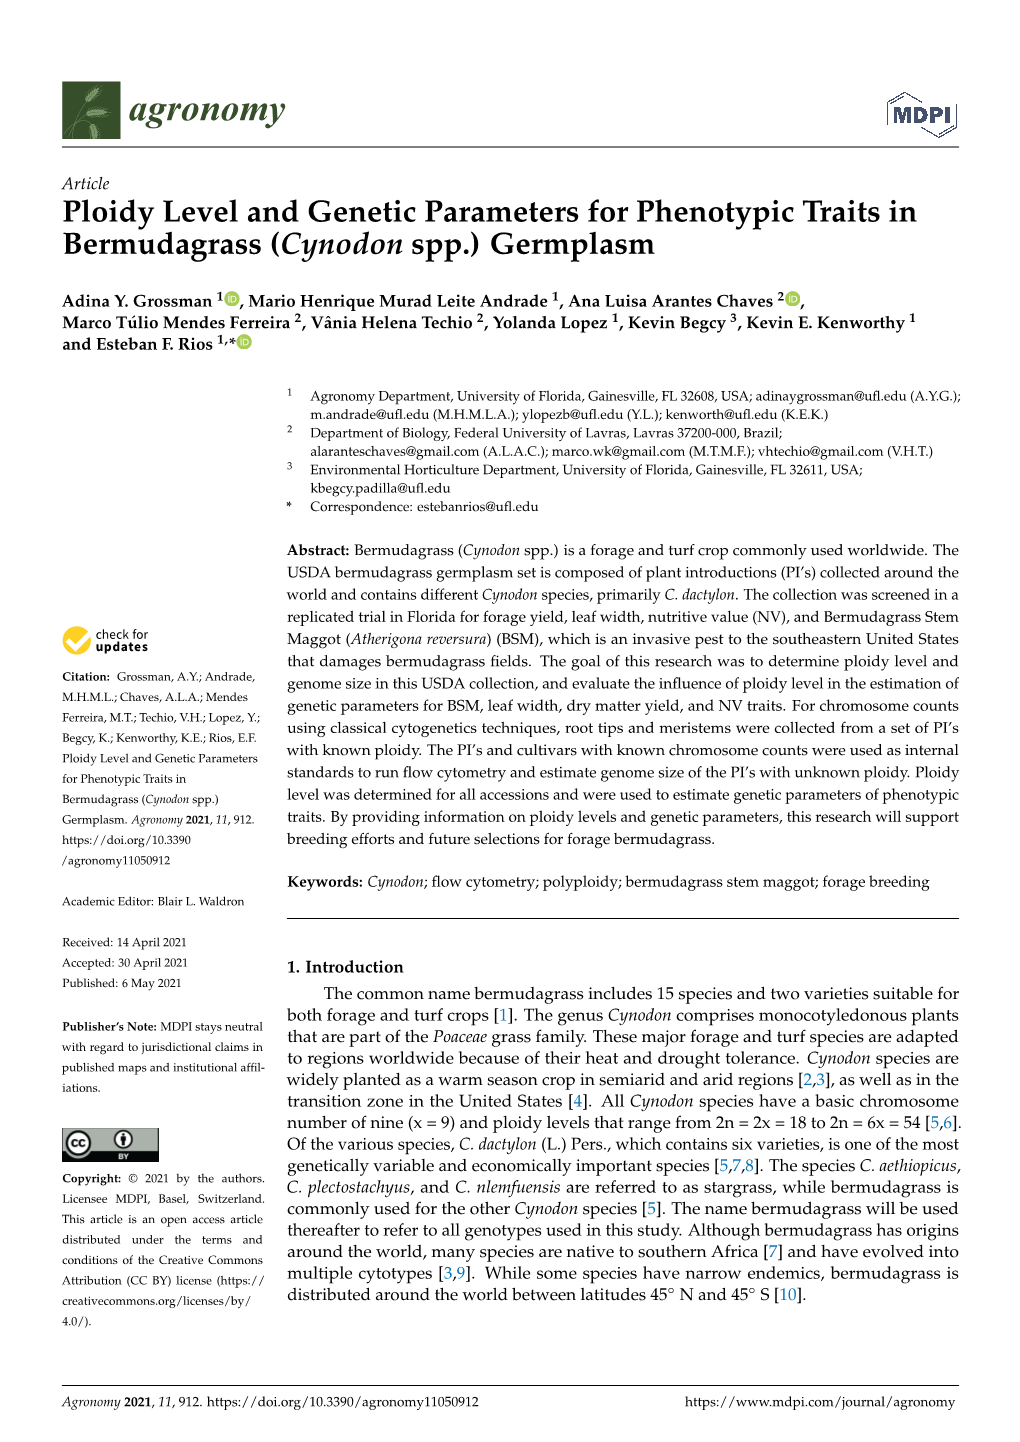 Ploidy Level and Genetic Parameters for Phenotypic Traits in Bermudagrass (Cynodon Spp.) Germplasm